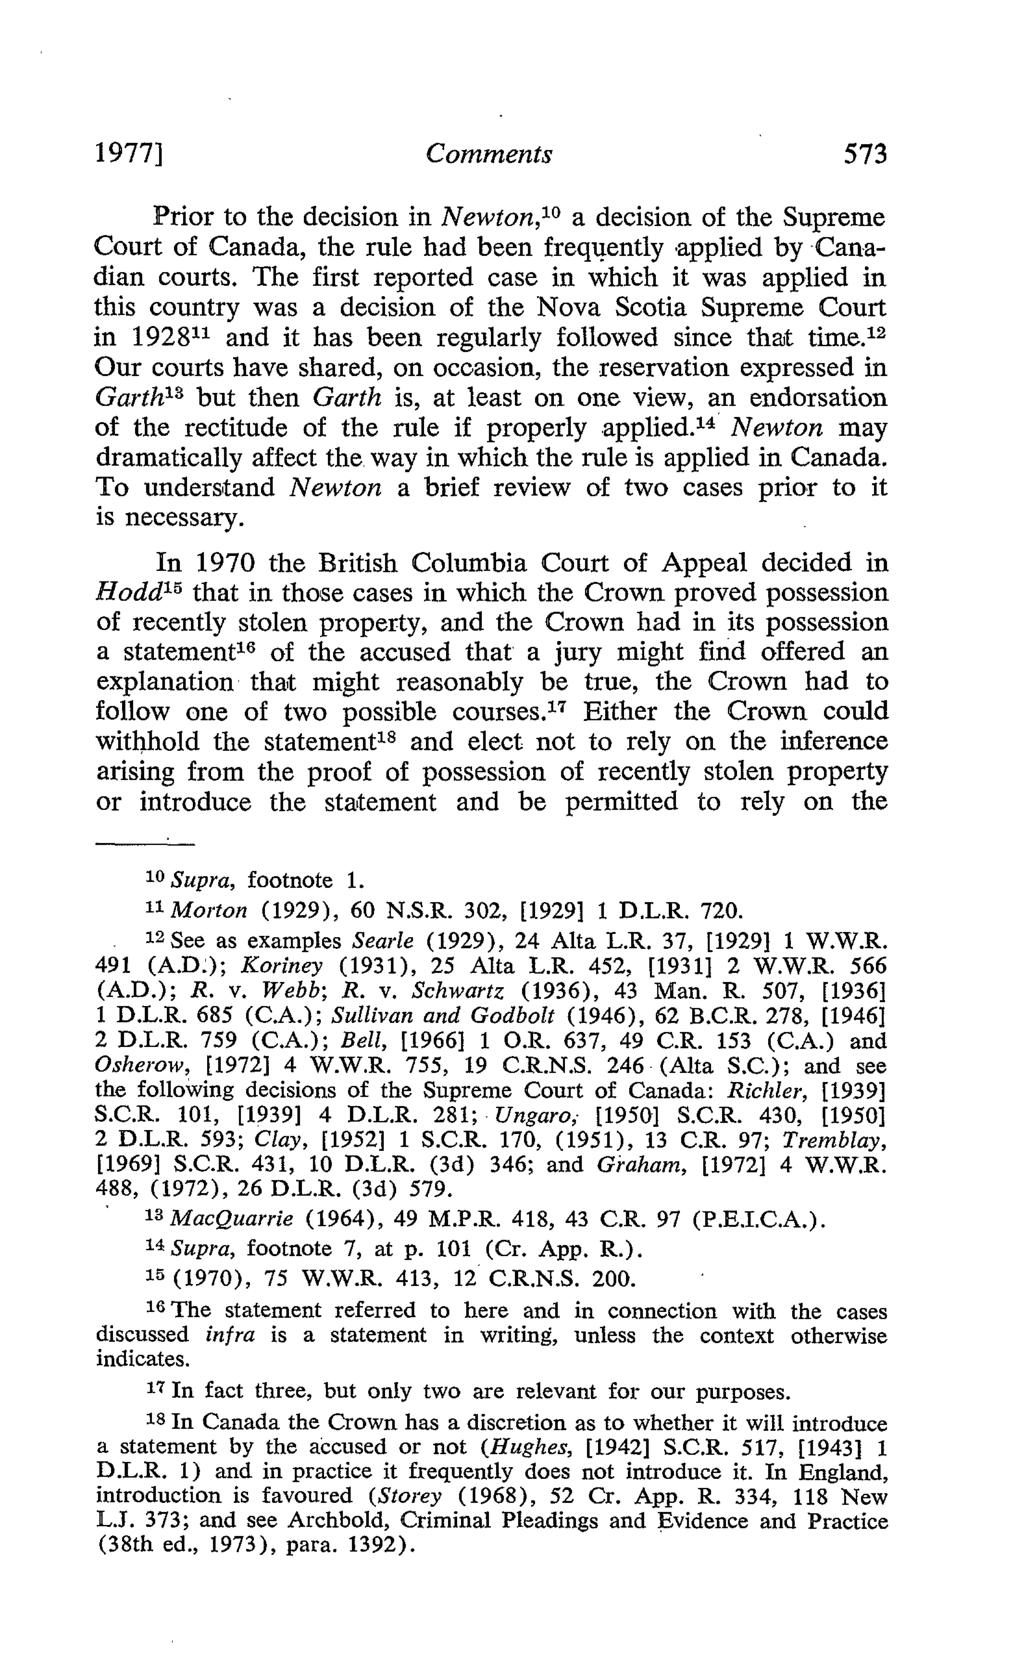 19771 Comments 573 Prior to the decision in Newton,1 a decision of the Supreme Court of Canada, the rule had been frequently applied by -Canadian courts.